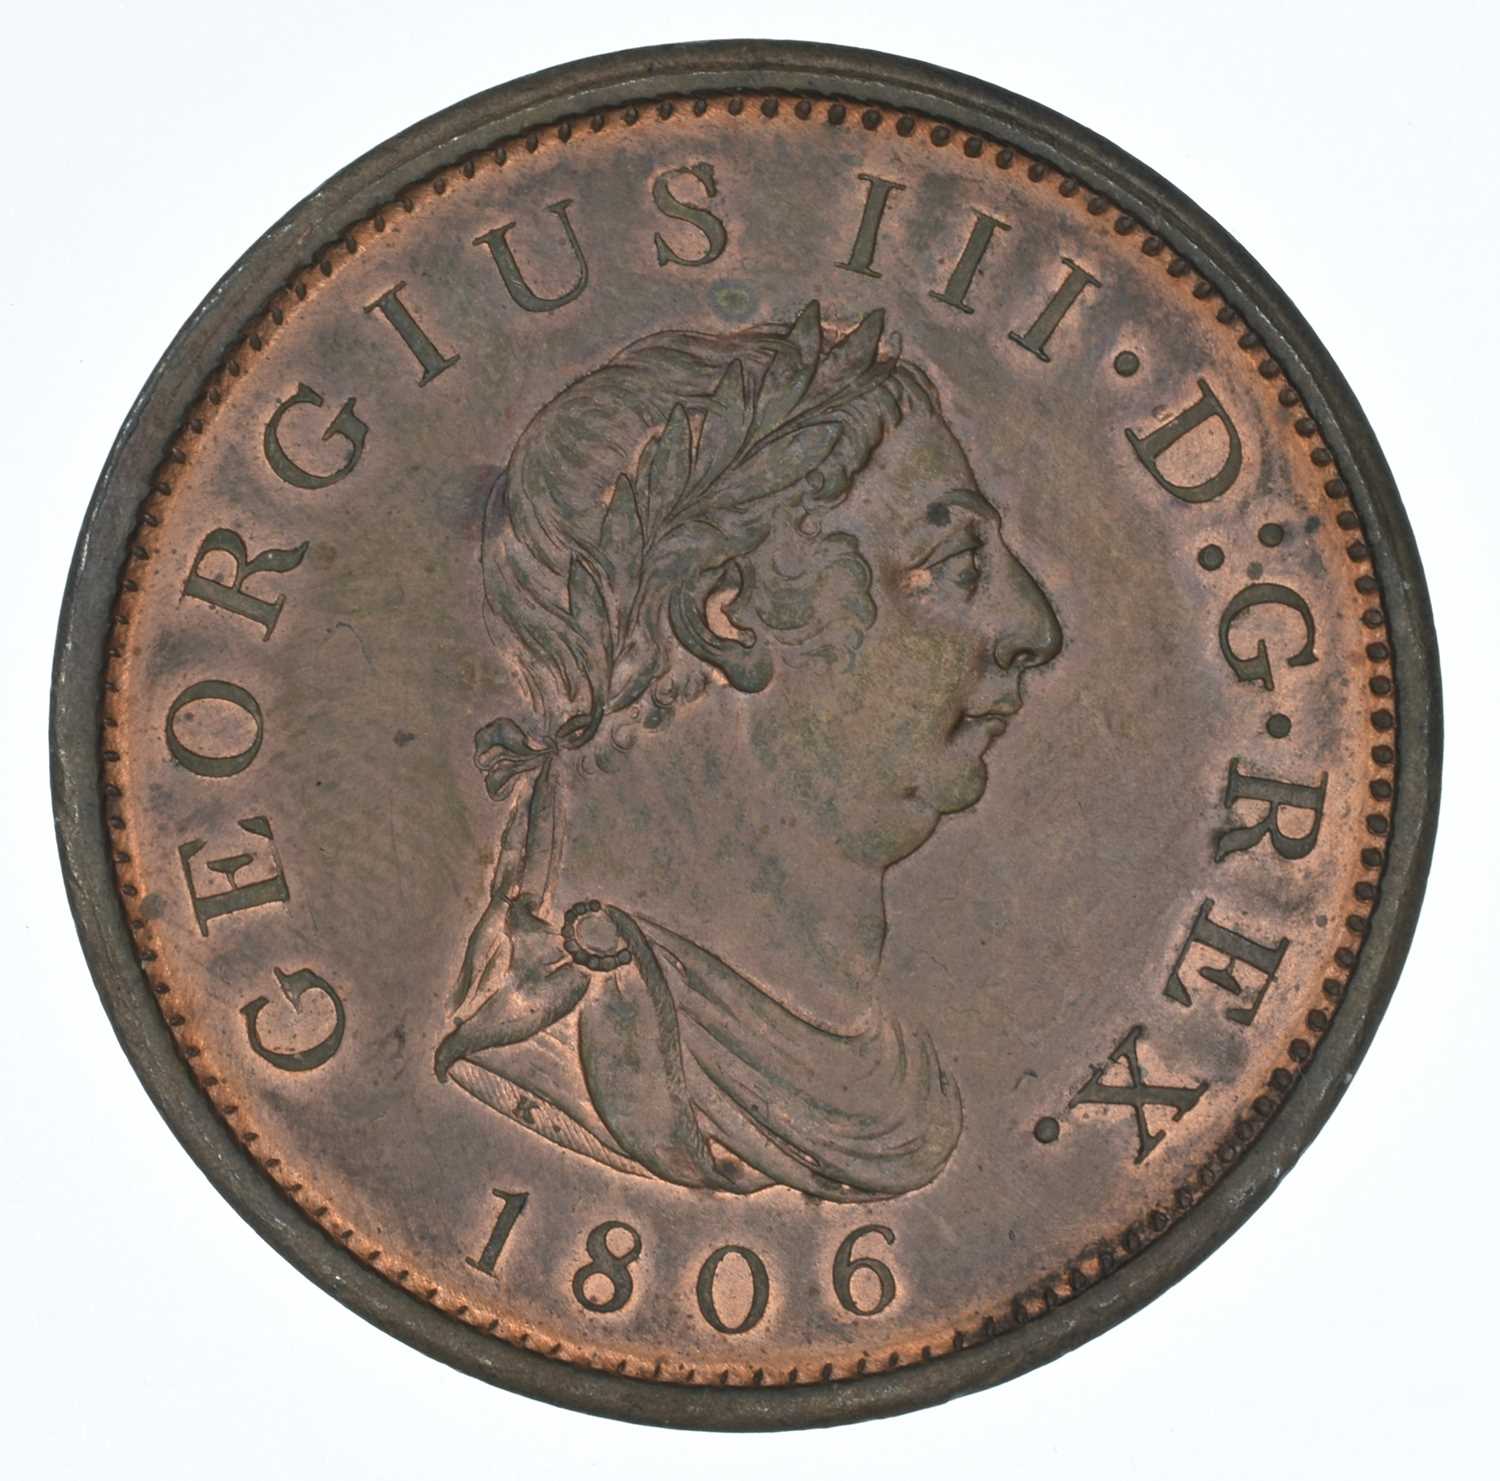 Lot 180 - King George III, Penny, 1806 and King George IV, Farthing, 1823 (2).